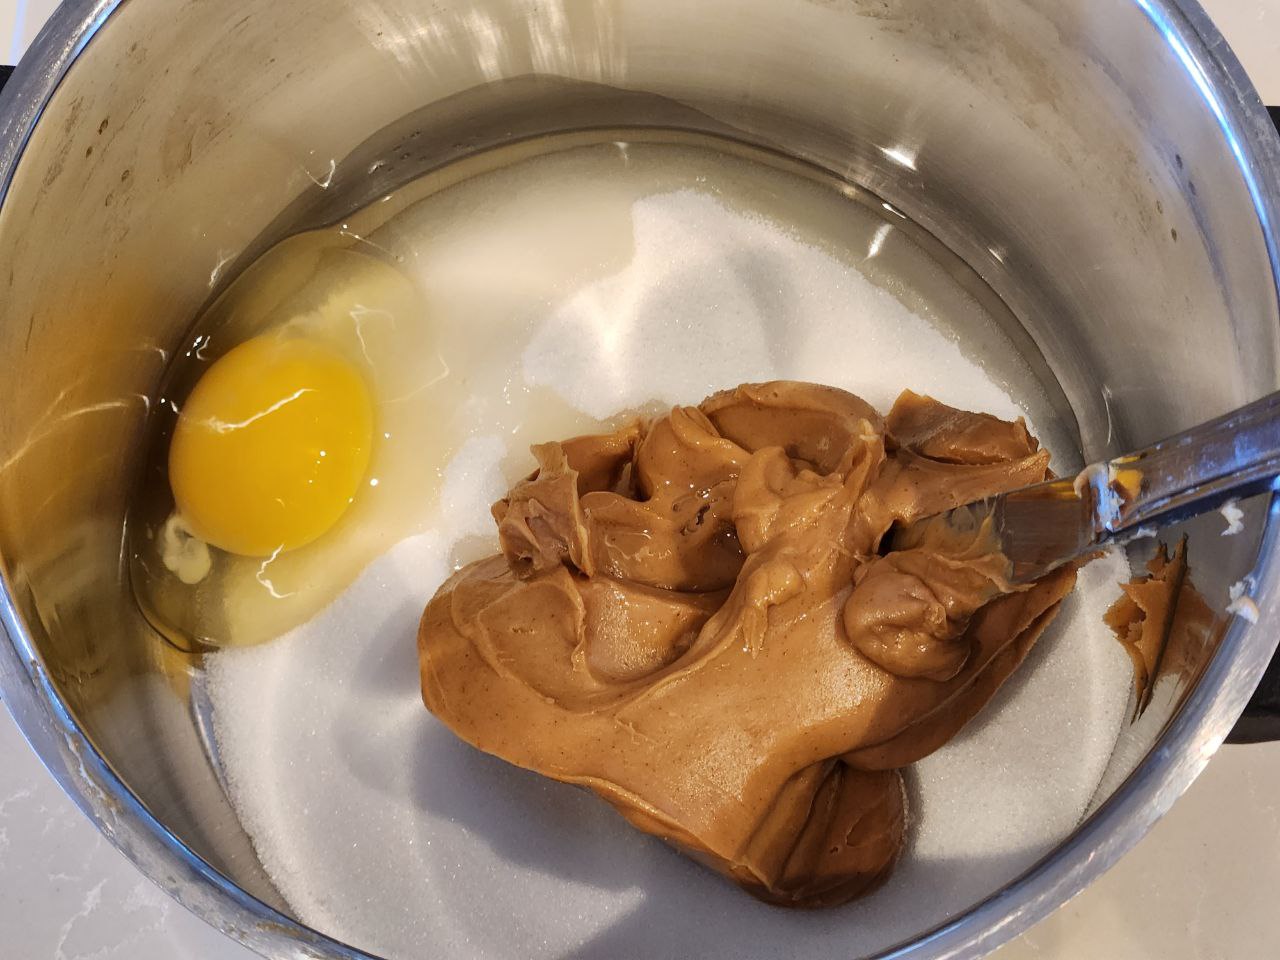 sugar, one egg, and peanut butter in a metal pot